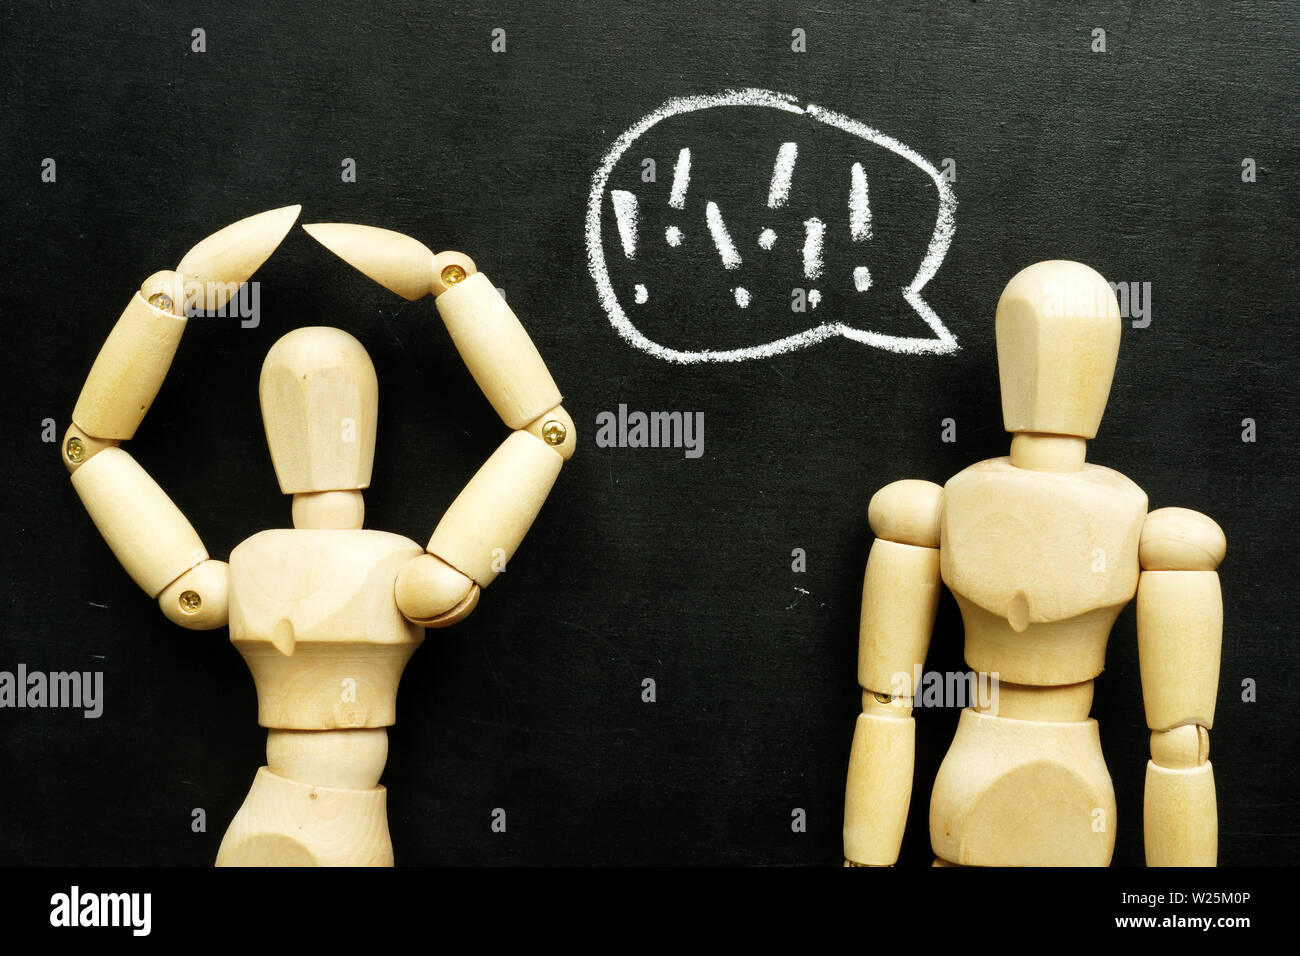 Abuse and bullying in communication. Two wooden figurines. Stock Photo